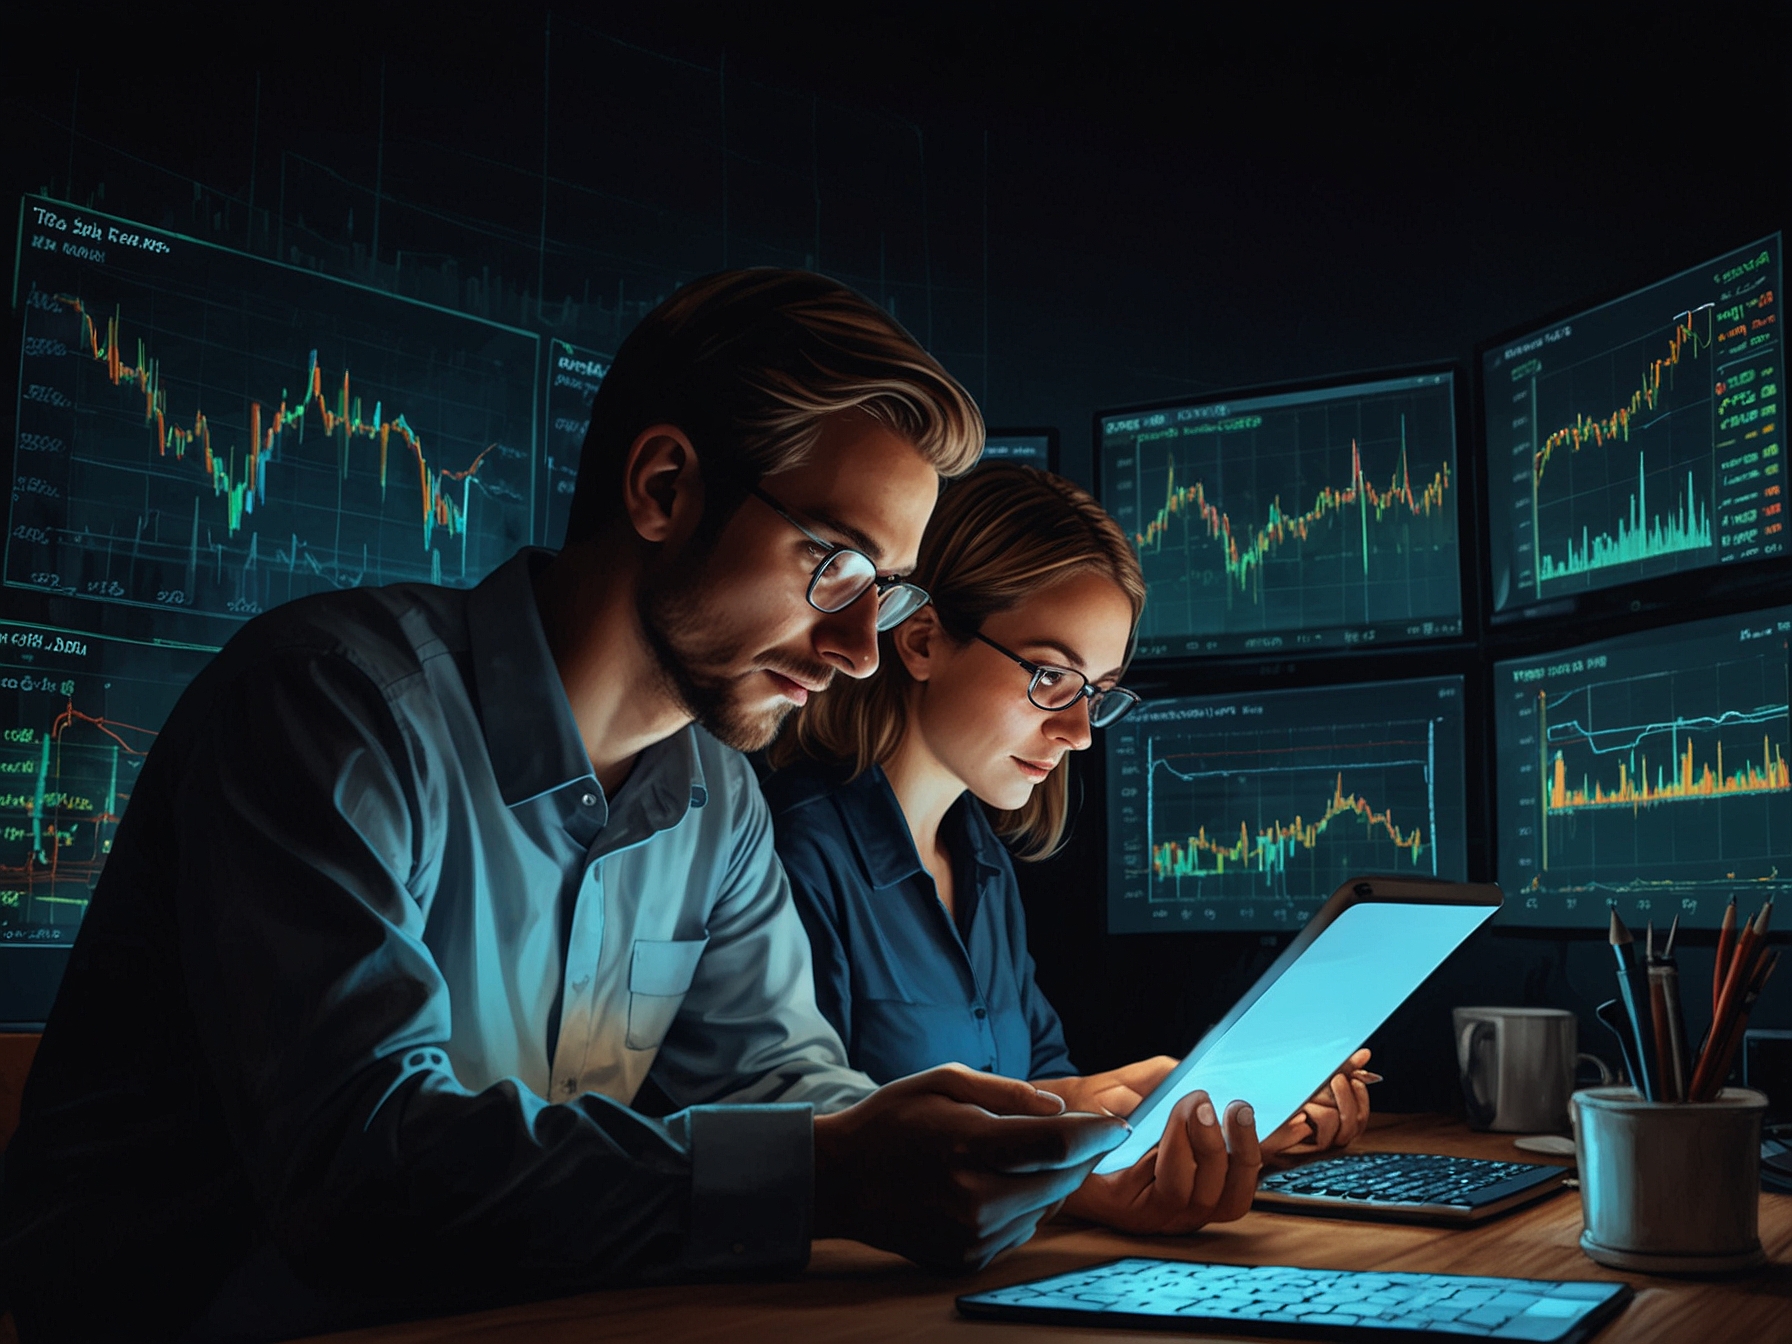 Investors analyzing energy stock trends on their digital devices, reflecting the increased interest and optimistic outlook towards the IEX and the energy sector.